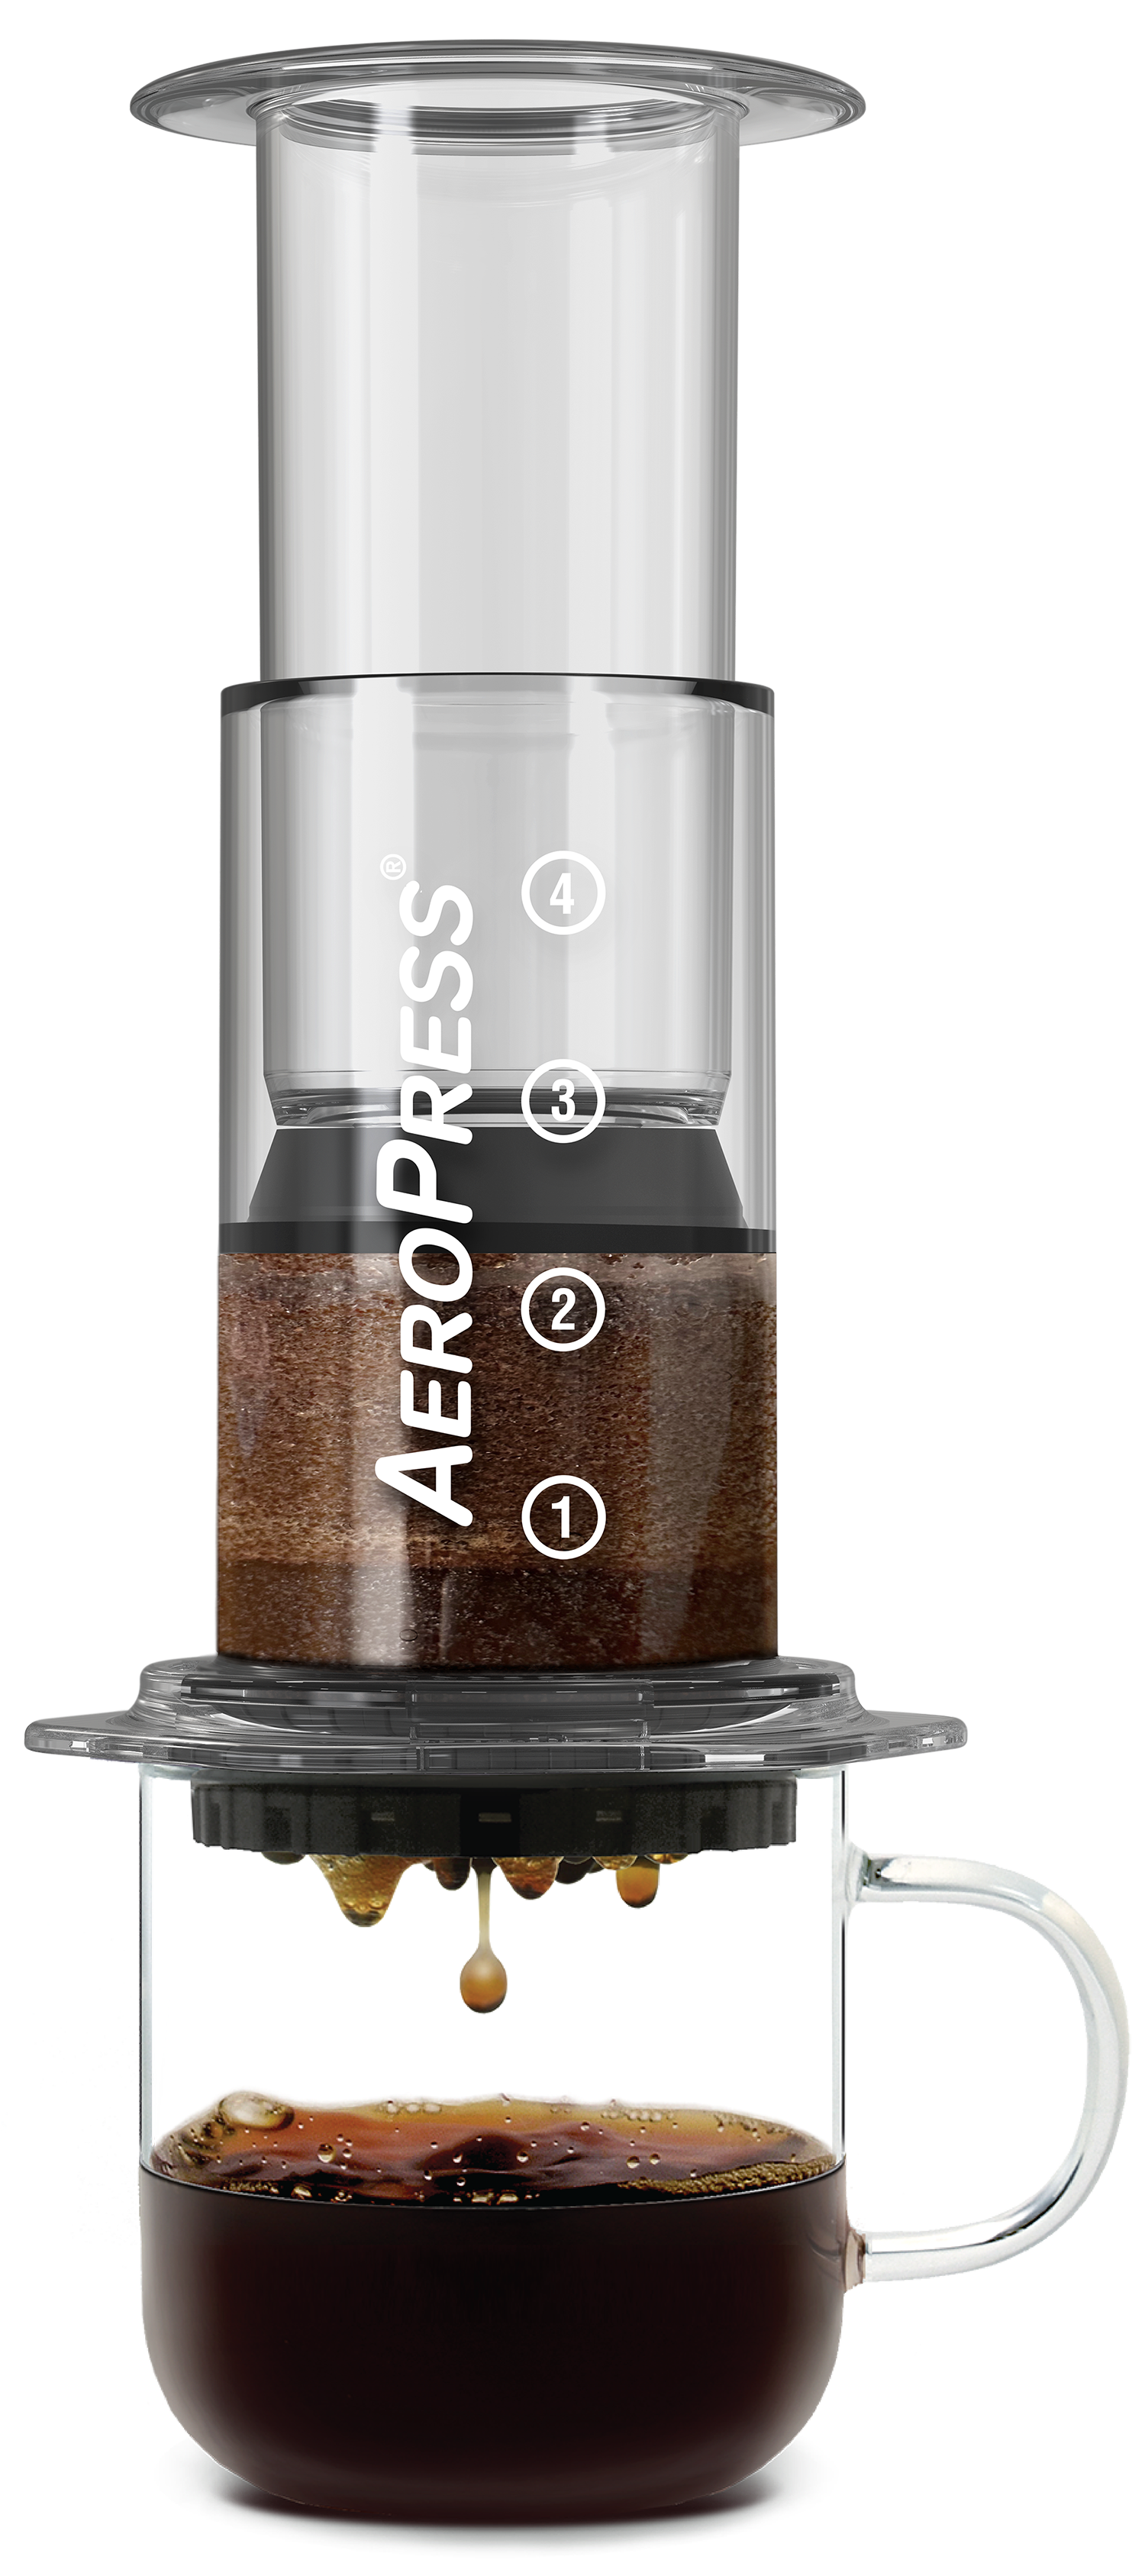 https://www.tkcsales.co.uk/userfiles/product_image/64492332196e7-aeropress-clear-on-mug-with-coffee-smaller.png